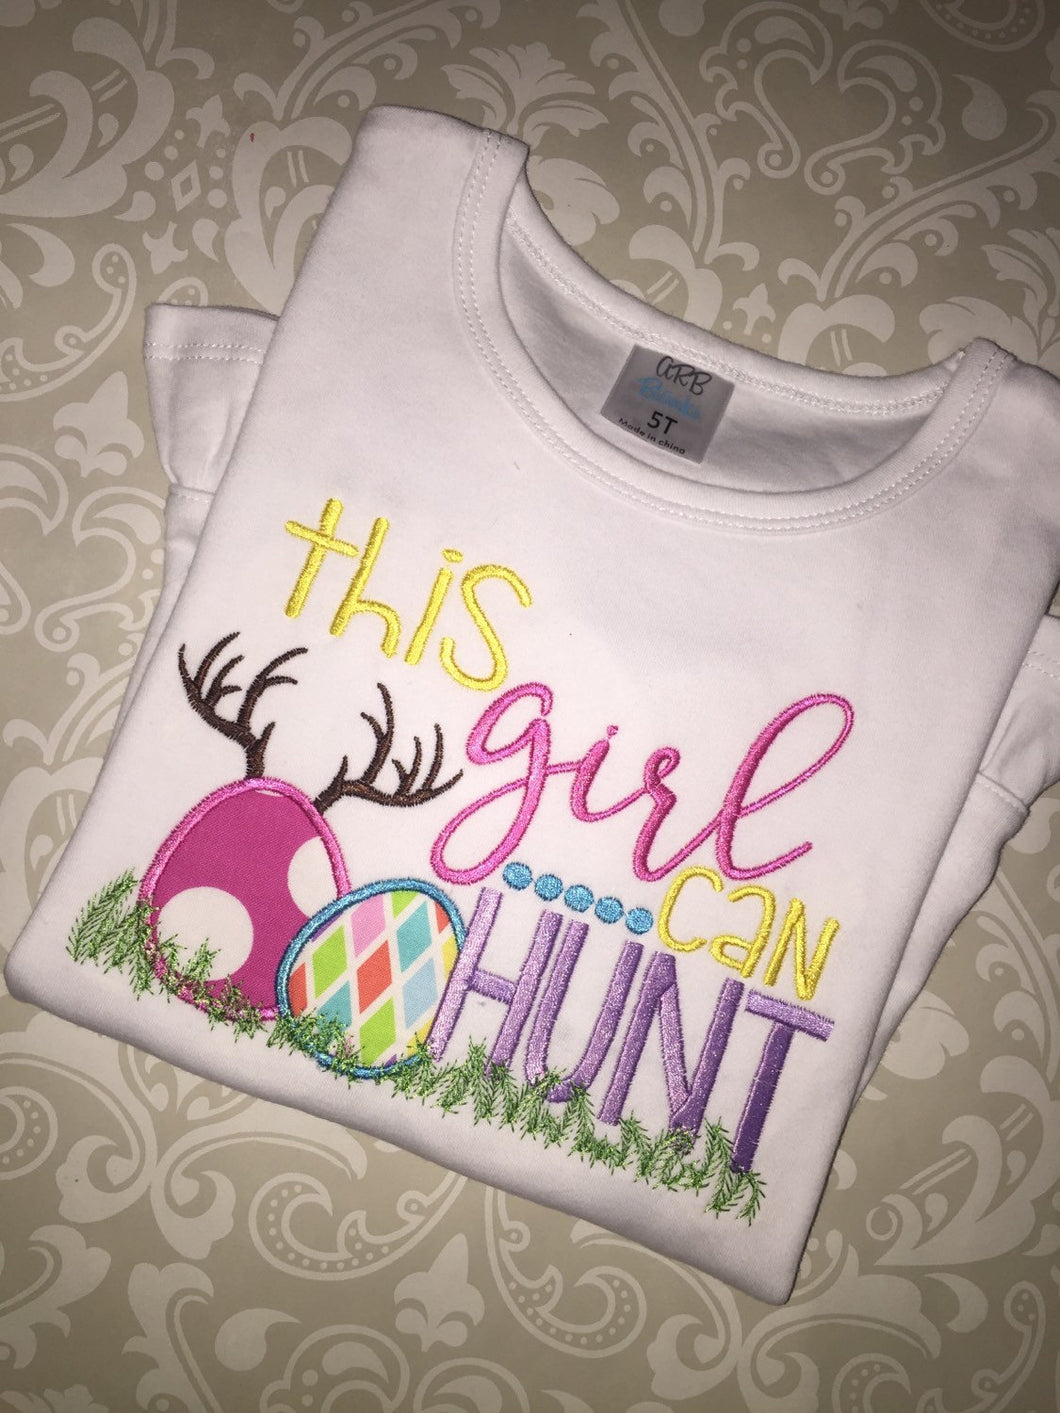 This girl can hunt applique Easter ruffle tee